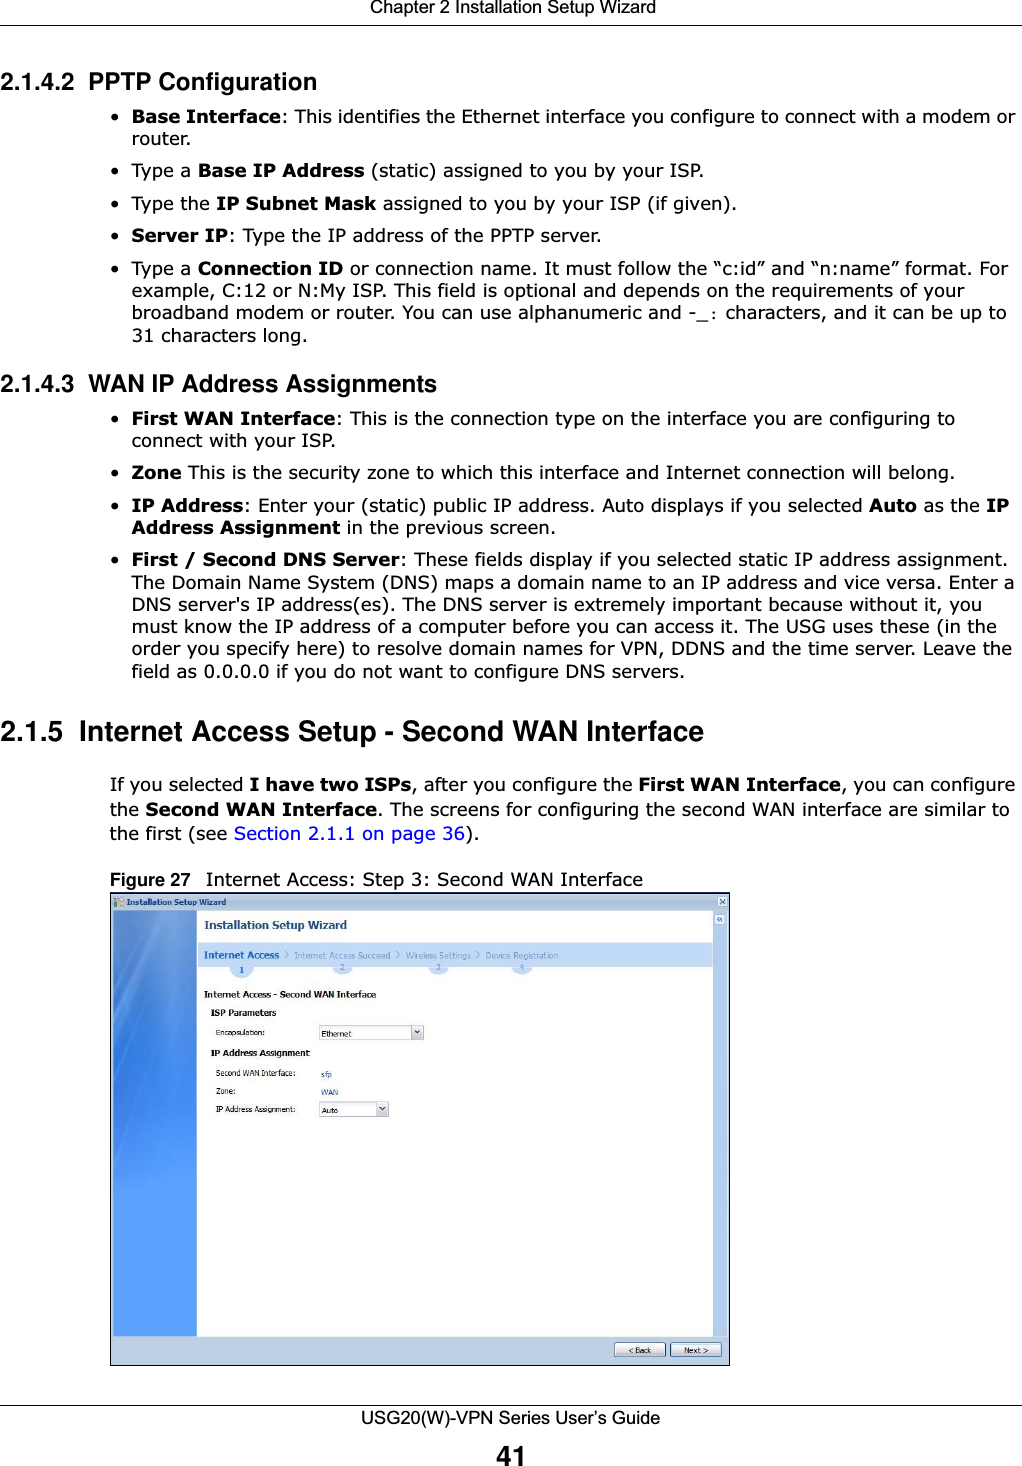  Chapter 2 Installation Setup WizardUSG20(W)-VPN Series User’s Guide412.1.4.2  PPTP Configuration•Base Interface: This identifies the Ethernet interface you configure to connect with a modem or router. •Type a Base IP Address (static) assigned to you by your ISP. • Type the IP Subnet Mask assigned to you by your ISP (if given).•Server IP: Type the IP address of the PPTP server.•Type a Connection ID or connection name. It must follow the “c:id” and “n:name” format. For example, C:12 or N:My ISP. This field is optional and depends on the requirements of your broadband modem or router. You can use alphanumeric and -_: characters, and it can be up to 31 characters long. 2.1.4.3  WAN IP Address Assignments •First WAN Interface: This is the connection type on the interface you are configuring to connect with your ISP.•Zone This is the security zone to which this interface and Internet connection will belong.•IP Address: Enter your (static) public IP address. Auto displays if you selected Auto as the IP Address Assignment in the previous screen. •First / Second DNS Server: These fields display if you selected static IP address assignment. The Domain Name System (DNS) maps a domain name to an IP address and vice versa. Enter a DNS server&apos;s IP address(es). The DNS server is extremely important because without it, you must know the IP address of a computer before you can access it. The USG uses these (in the order you specify here) to resolve domain names for VPN, DDNS and the time server. Leave the field as 0.0.0.0 if you do not want to configure DNS servers. 2.1.5  Internet Access Setup - Second WAN InterfaceIf you selected I have two ISPs, after you configure the First WAN Interface, you can configure the Second WAN Interface. The screens for configuring the second WAN interface are similar to the first (see Section 2.1.1 on page 36).Figure 27   Internet Access: Step 3: Second WAN Interface   